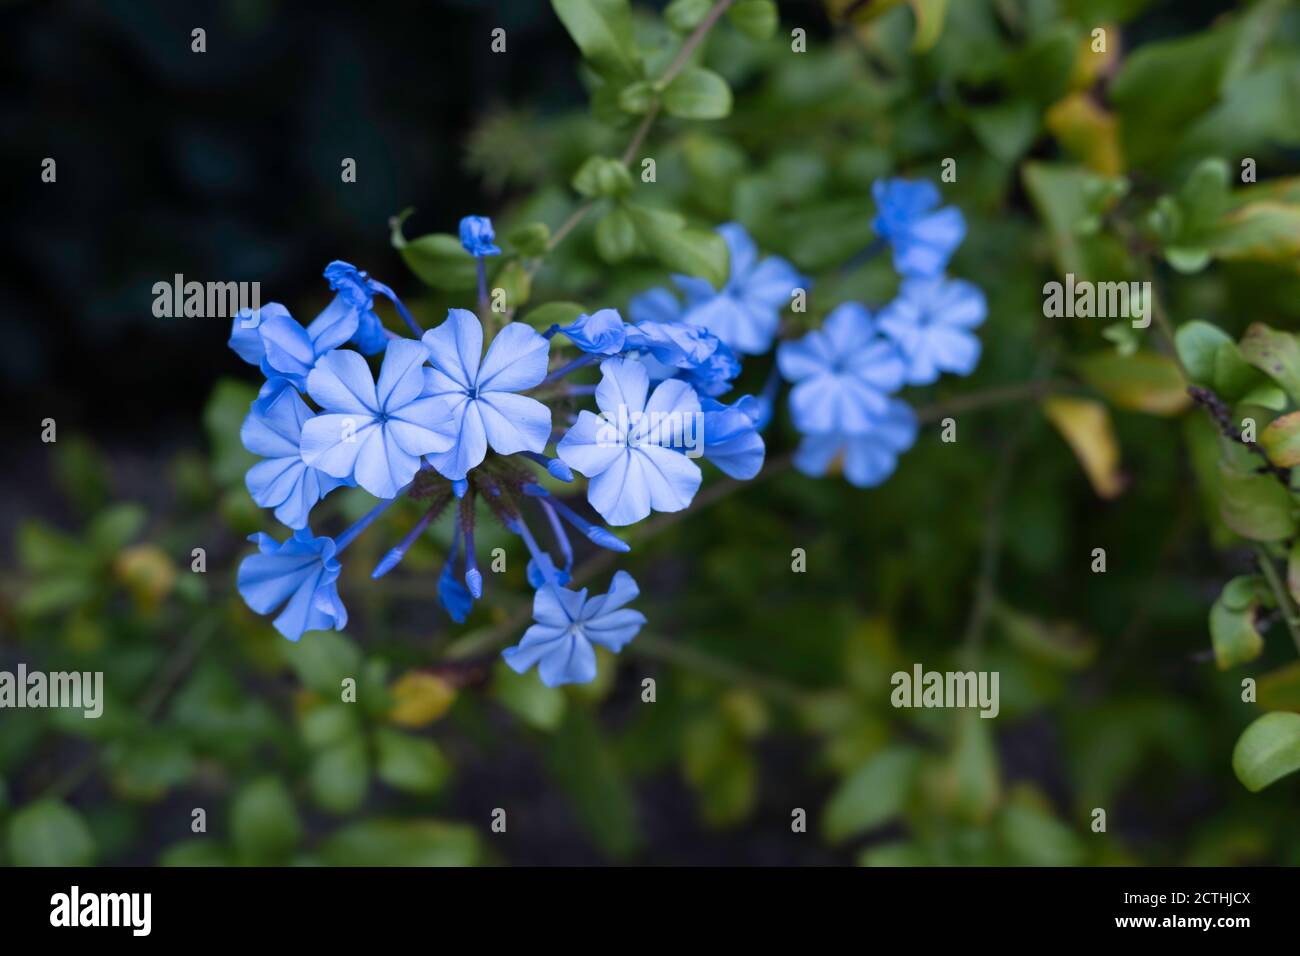 Cape Leadwort or White Plumbago flowers in garden against a green blurred background Stock Photo